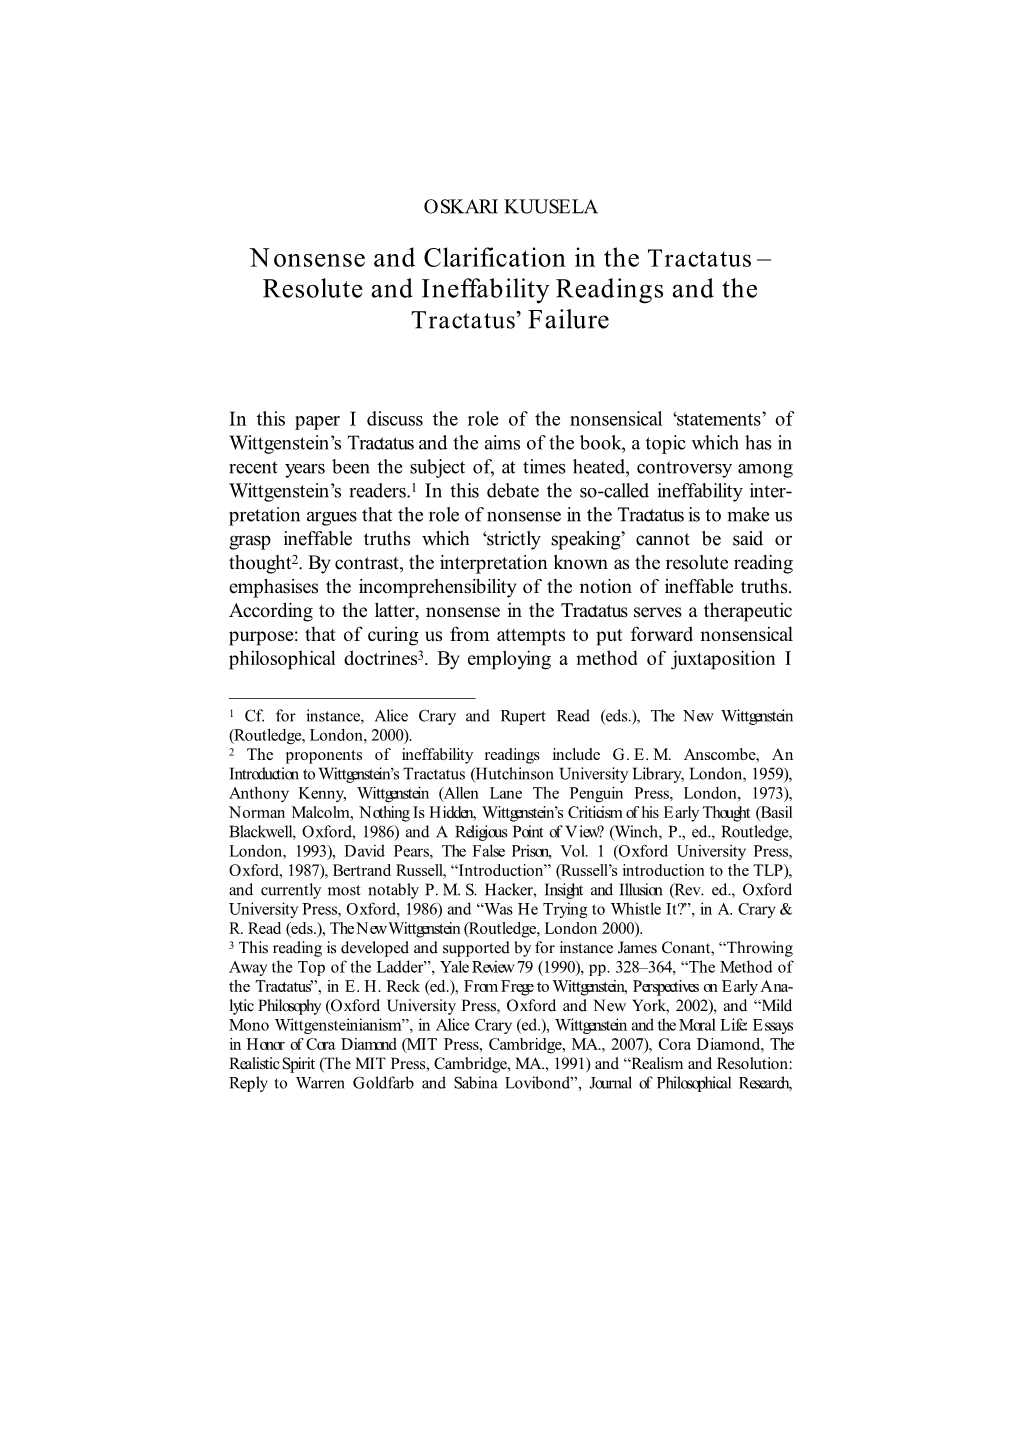 Nonsense and Clarification in the Tractatus – Resolute and Ineffability Readings and the Tractatus’ Failure